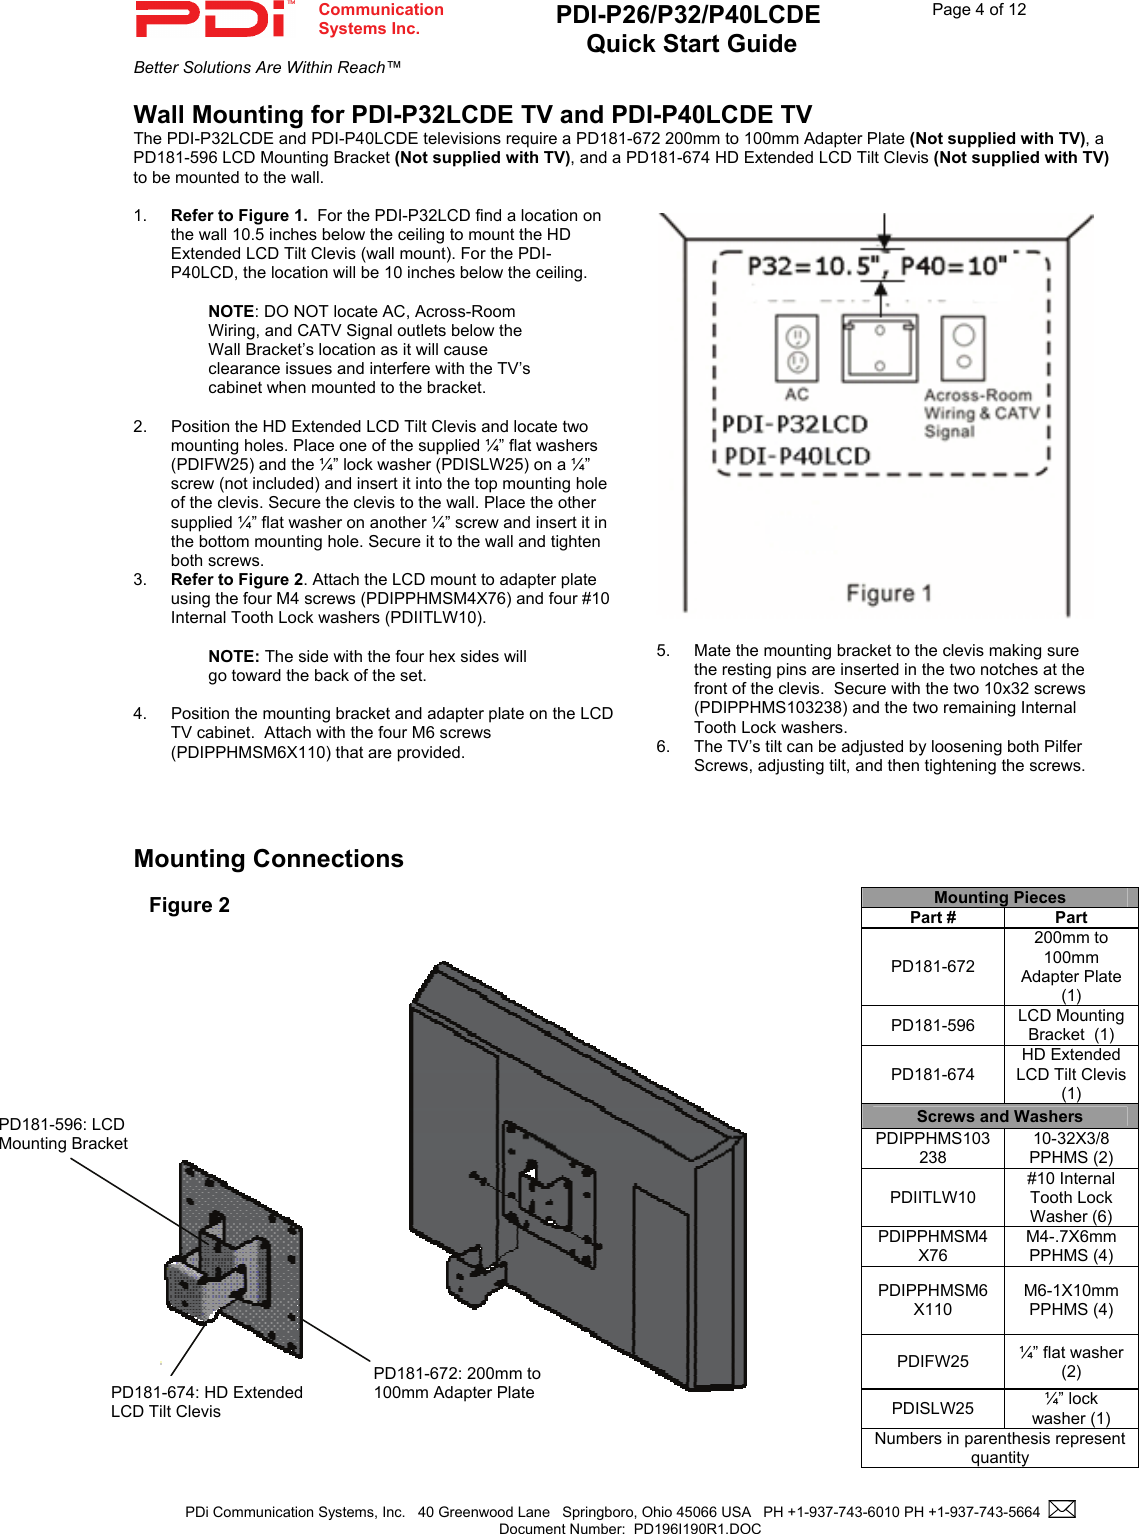  Communication  Systems Inc. PDI-P26/P32/P40LCDE  Quick Start Guide  Page 4 of 12 Better Solutions Are Within Reach™  PDi Communication Systems, Inc.   40 Greenwood Lane   Springboro, Ohio 45066 USA   PH +1-937-743-6010 PH +1-937-743-5664    Document Number:  PD196I190R1.DOC   Wall Mounting for PDI-P32LCDE TV and PDI-P40LCDE TV The PDI-P32LCDE and PDI-P40LCDE televisions require a PD181-672 200mm to 100mm Adapter Plate (Not supplied with TV), a PD181-596 LCD Mounting Bracket (Not supplied with TV), and a PD181-674 HD Extended LCD Tilt Clevis (Not supplied with TV) to be mounted to the wall.  1.  Refer to Figure 1.  For the PDI-P32LCD find a location on the wall 10.5 inches below the ceiling to mount the HD Extended LCD Tilt Clevis (wall mount). For the PDI-P40LCD, the location will be 10 inches below the ceiling.    NOTE: DO NOT locate AC, Across-Room Wiring, and CATV Signal outlets below the Wall Bracket’s location as it will cause clearance issues and interfere with the TV’s cabinet when mounted to the bracket.    2.  Position the HD Extended LCD Tilt Clevis and locate two mounting holes. Place one of the supplied ¼” flat washers (PDIFW25) and the ¼” lock washer (PDISLW25) on a ¼” screw (not included) and insert it into the top mounting hole of the clevis. Secure the clevis to the wall. Place the other supplied ¼” flat washer on another ¼” screw and insert it in the bottom mounting hole. Secure it to the wall and tighten both screws. 3.  Refer to Figure 2. Attach the LCD mount to adapter plate using the four M4 screws (PDIPPHMSM4X76) and four #10 Internal Tooth Lock washers (PDIITLW10).  NOTE: The side with the four hex sides will go toward the back of the set.  4.  Position the mounting bracket and adapter plate on the LCD TV cabinet.  Attach with the four M6 screws (PDIPPHMSM6X110) that are provided.      Mounting Connections                                                       Mounting Pieces Part #  Part PD181-672 200mm to 100mm Adapter Plate  (1) PD181-596  LCD Mounting Bracket  (1) PD181-674 HD Extended LCD Tilt Clevis  (1) Screws and Washers PDIPPHMS103238 10-32X3/8 PPHMS (2) PDIITLW10 #10 Internal Tooth Lock Washer (6) PDIPPHMSM4X76 M4-.7X6mm PPHMS (4) PDIPPHMSM6X110 M6-1X10mm PPHMS (4) PDIFW25  ¼” flat washer (2) PDISLW25  ¼” lock washer (1) Numbers in parenthesis represent quantity Figure 2 PD181-672: 200mm to 100mm Adapter Plate PD181-596: LCD Mounting Bracket PD181-674: HD Extended LCD Tilt Clevis  5.  Mate the mounting bracket to the clevis making sure the resting pins are inserted in the two notches at the front of the clevis.  Secure with the two 10x32 screws (PDIPPHMS103238) and the two remaining Internal Tooth Lock washers. 6.  The TV’s tilt can be adjusted by loosening both Pilfer Screws, adjusting tilt, and then tightening the screws. 